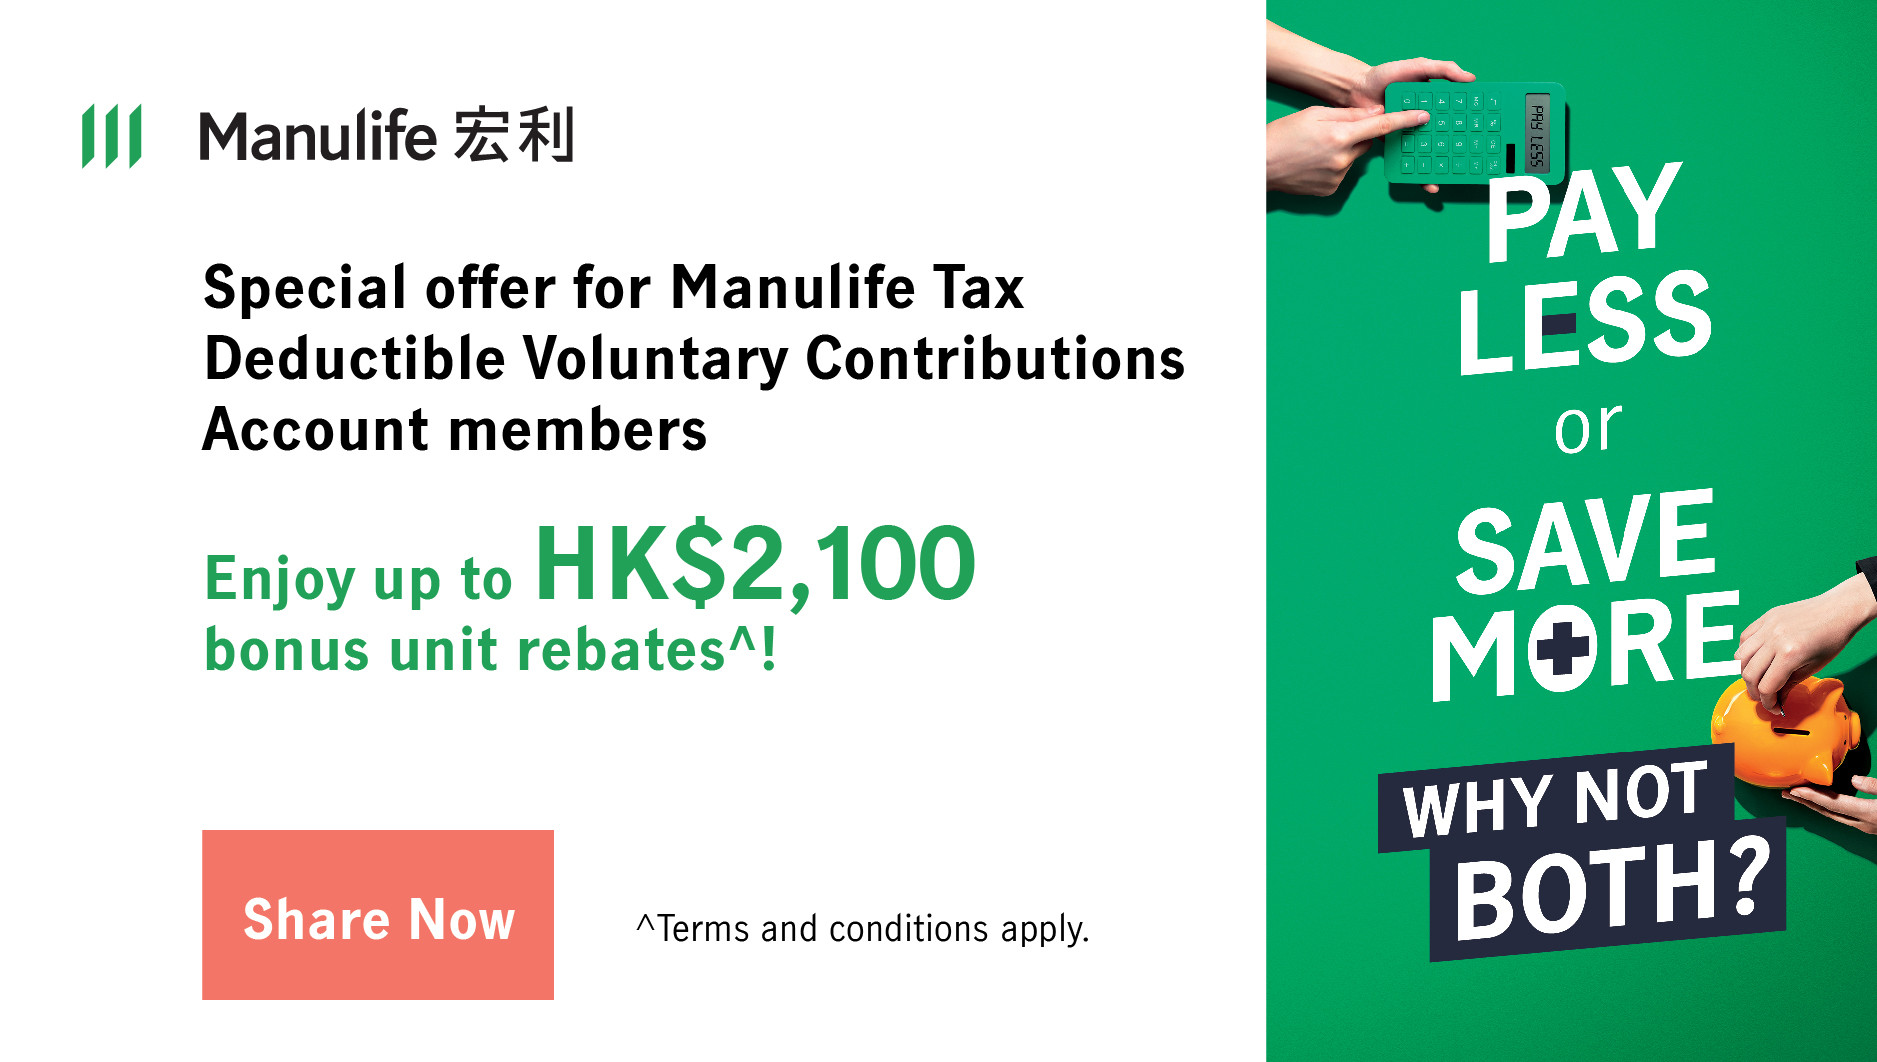 Special offer for Manulife Tax Deductible Voluntary Contributions (“TVC”) Account members